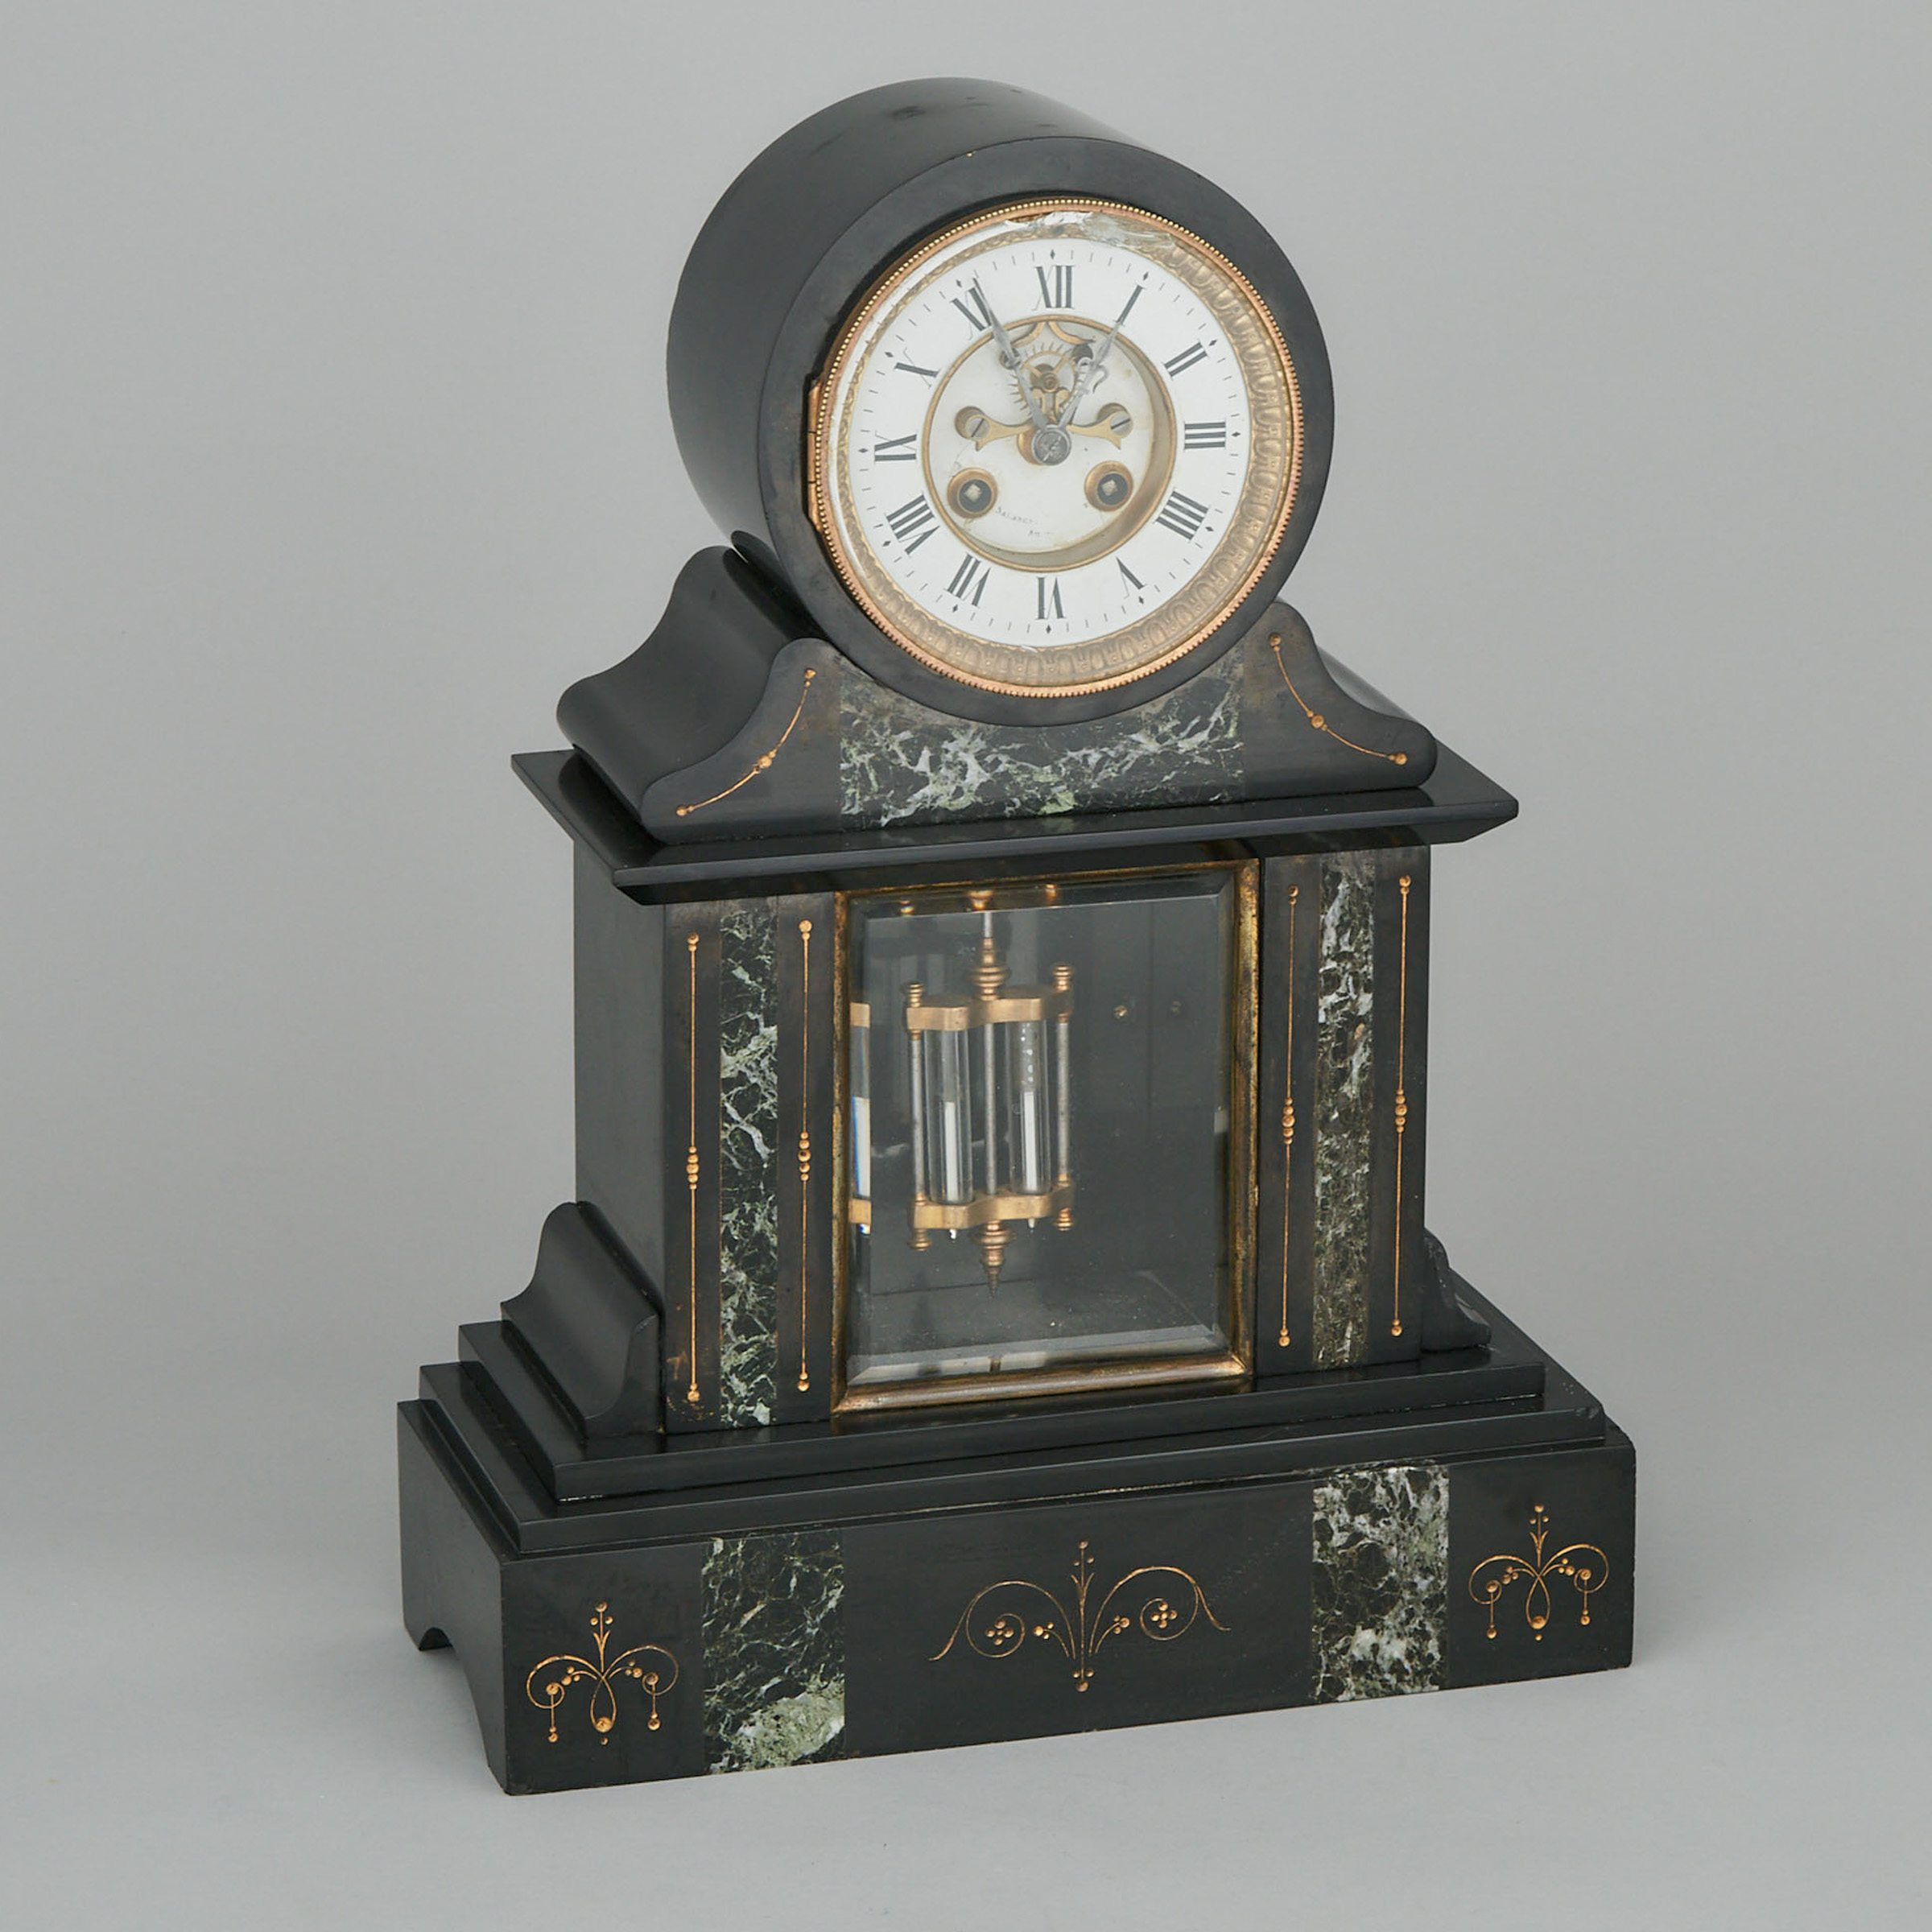 French Verde Antico Inlaid Belgian Black Marble Mantle Clock, late 19th century